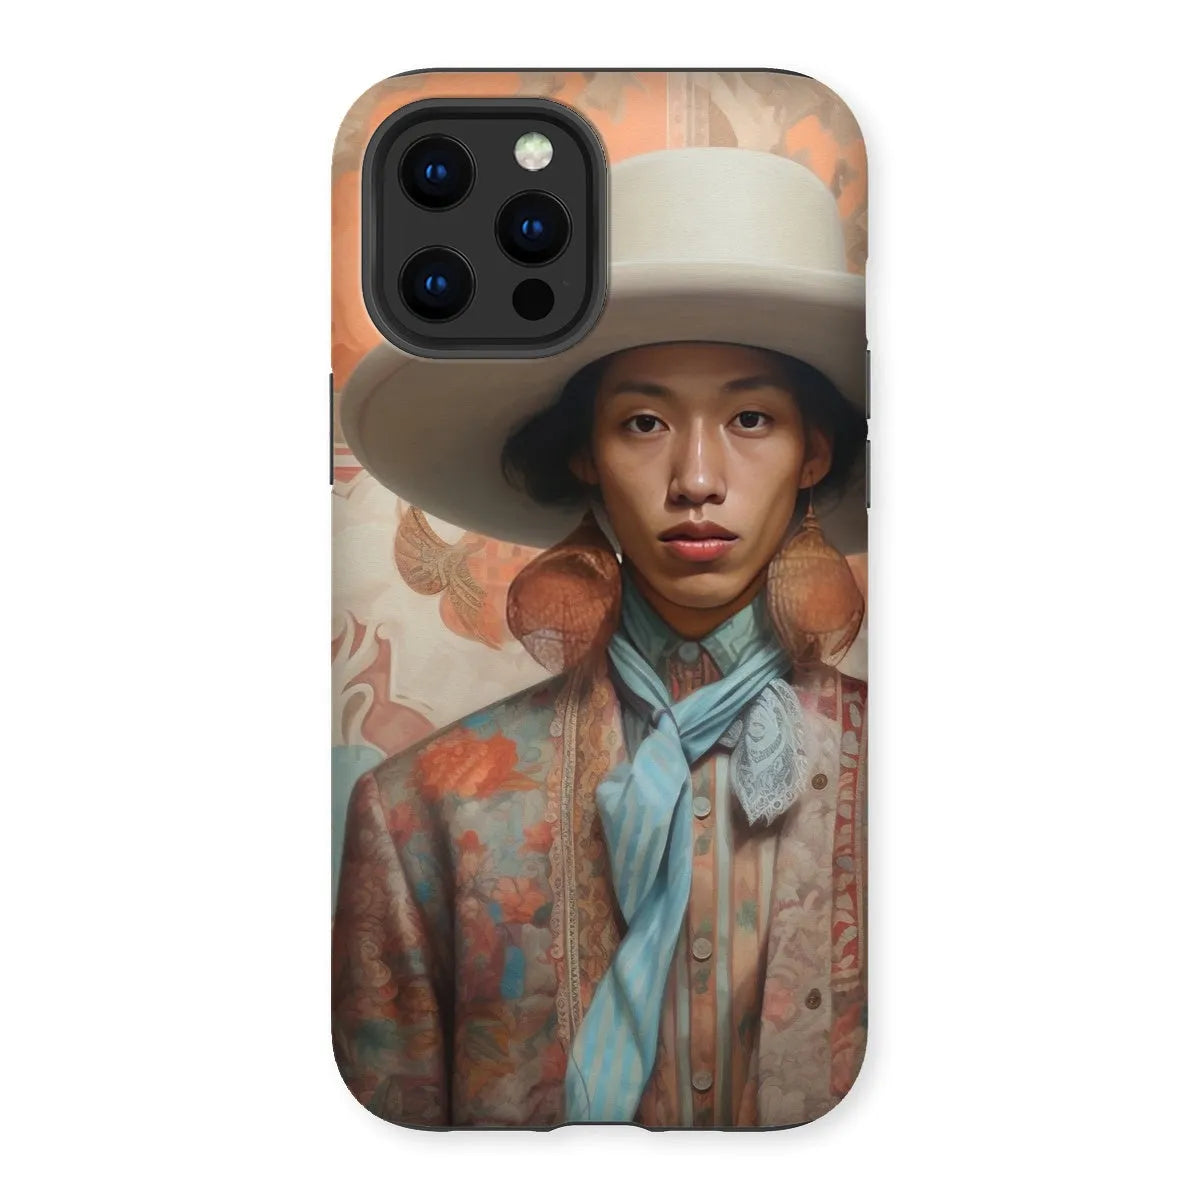 Iyaan - Gay Malay Asian Cowboy Aesthetic Art Phone Case - Iphone 12 Pro Max / Matte - Mobile Phone Cases - Aesthetic Art